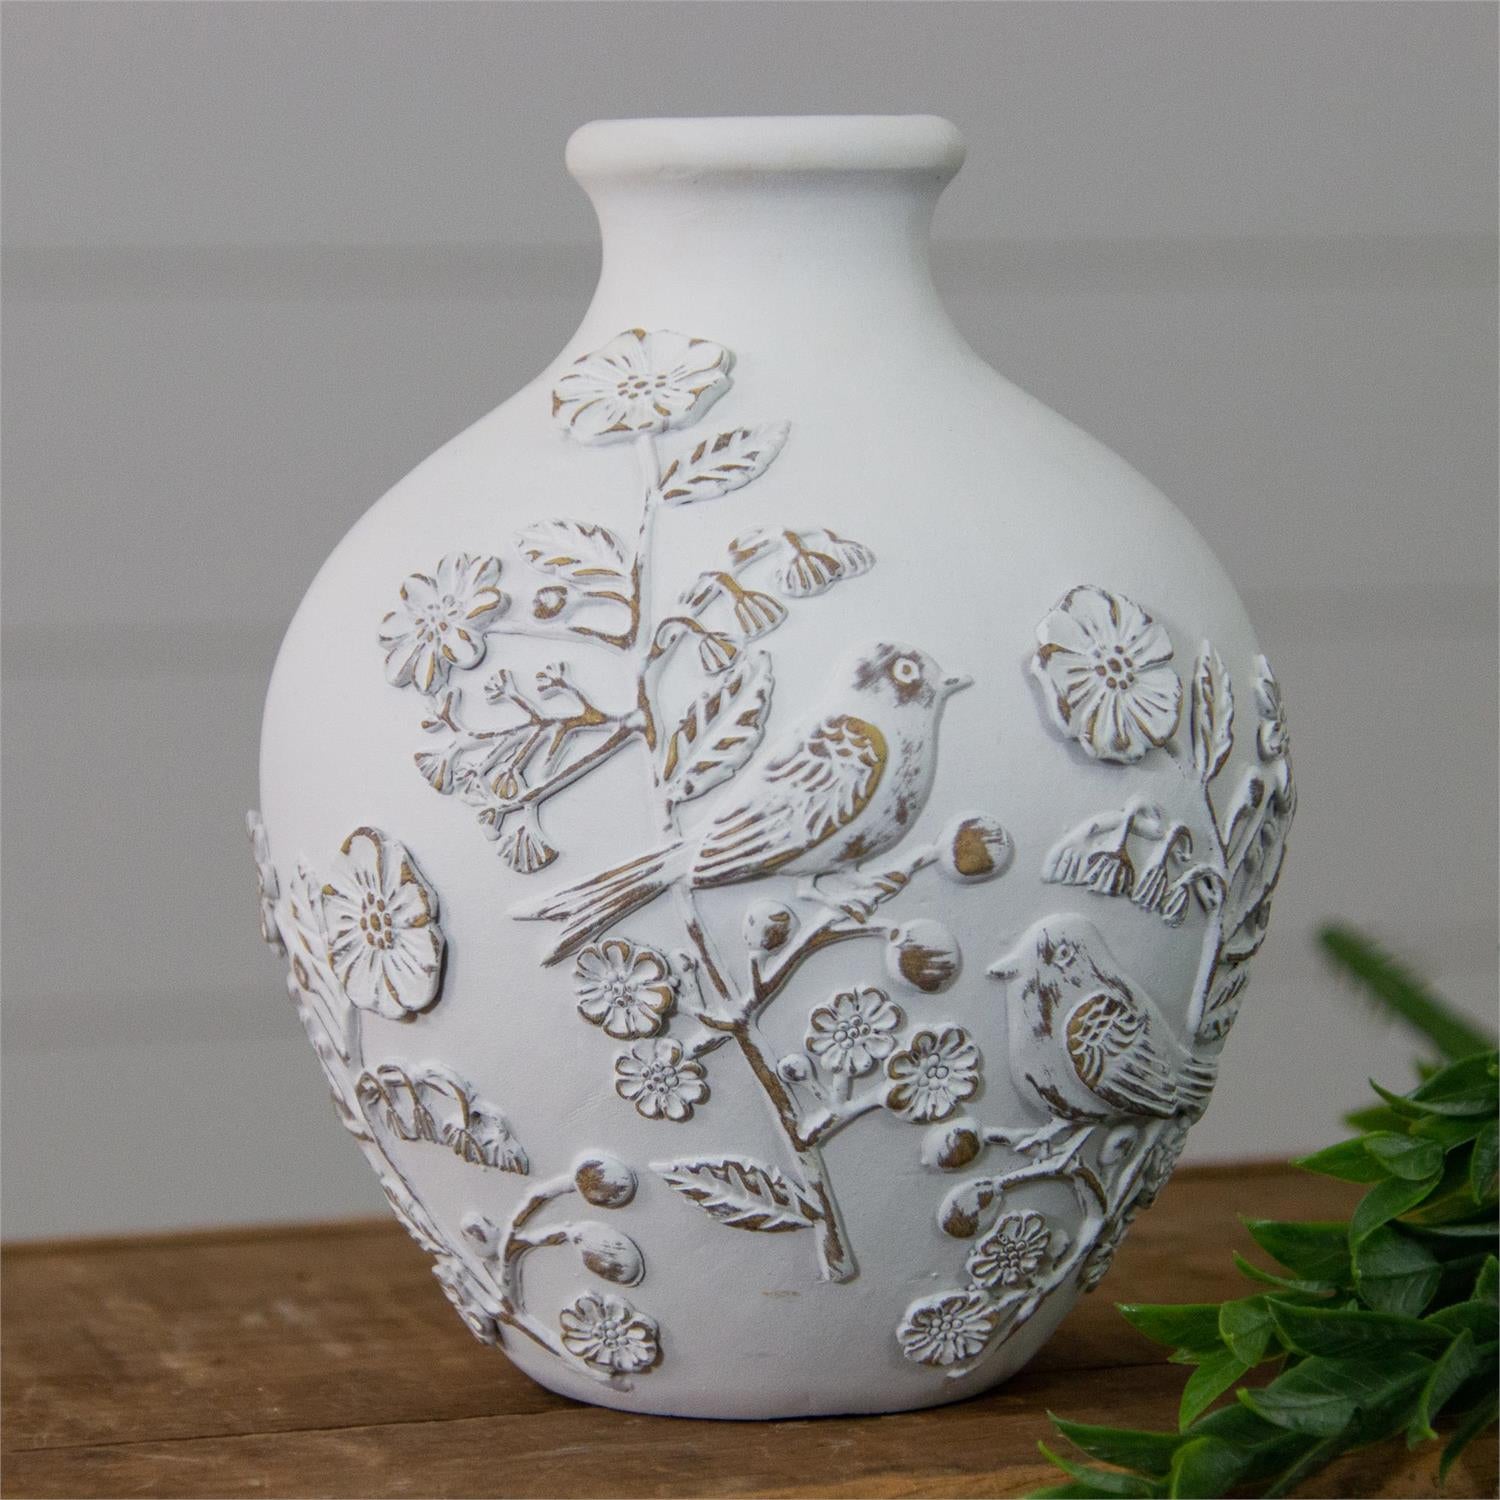 Vase With Textured Flowers and Birds